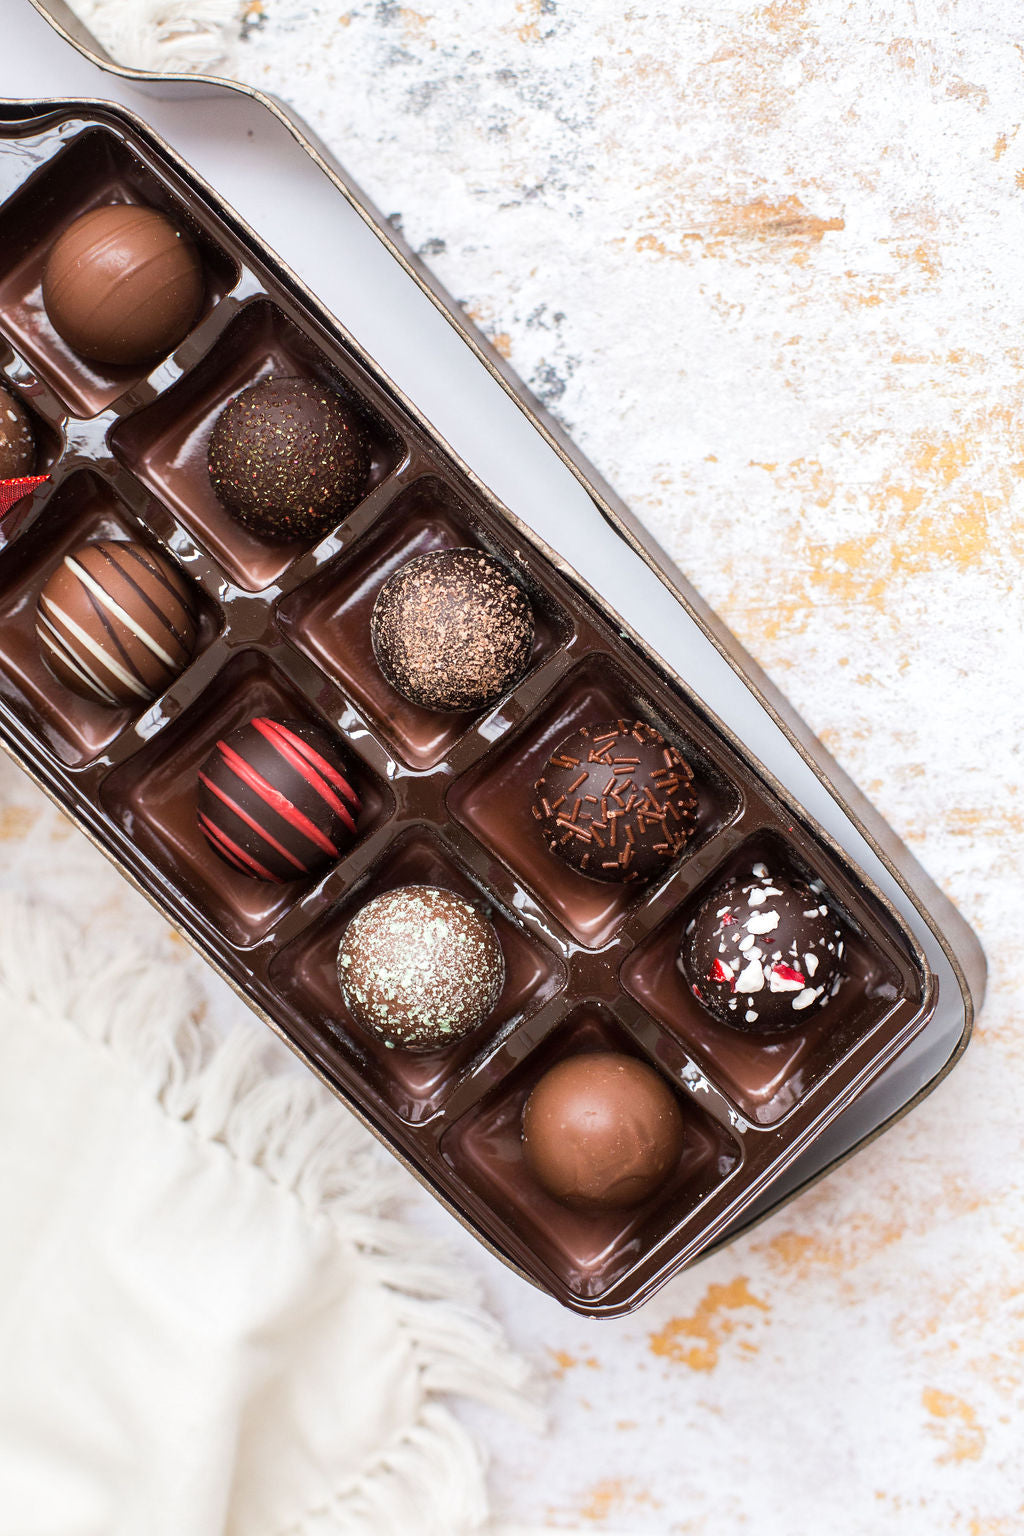 12 Delightful  Sugar Plum’s Incredible Handcrafted Chocolate Truffles in a Wine-Shaped Box